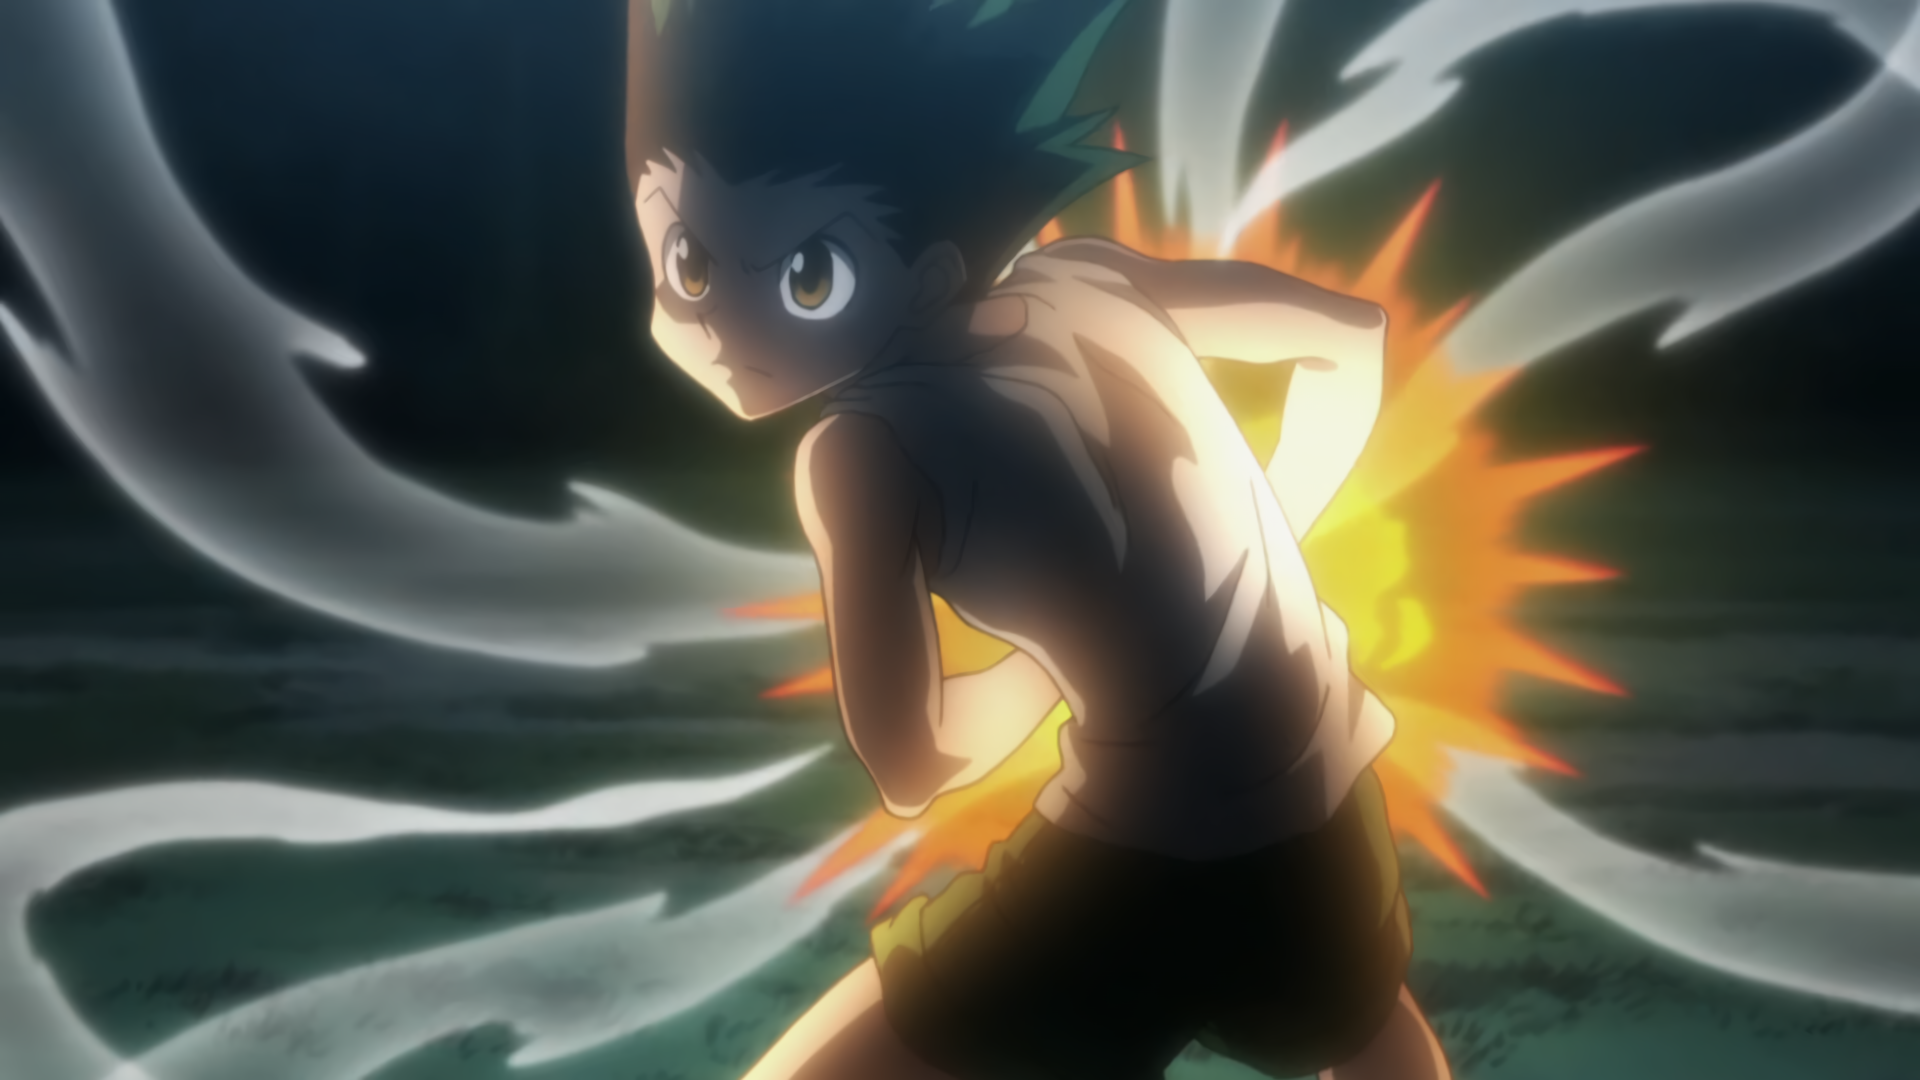 Gon_preparing_Janken_during_first_fight_with_Knuckle.PNG